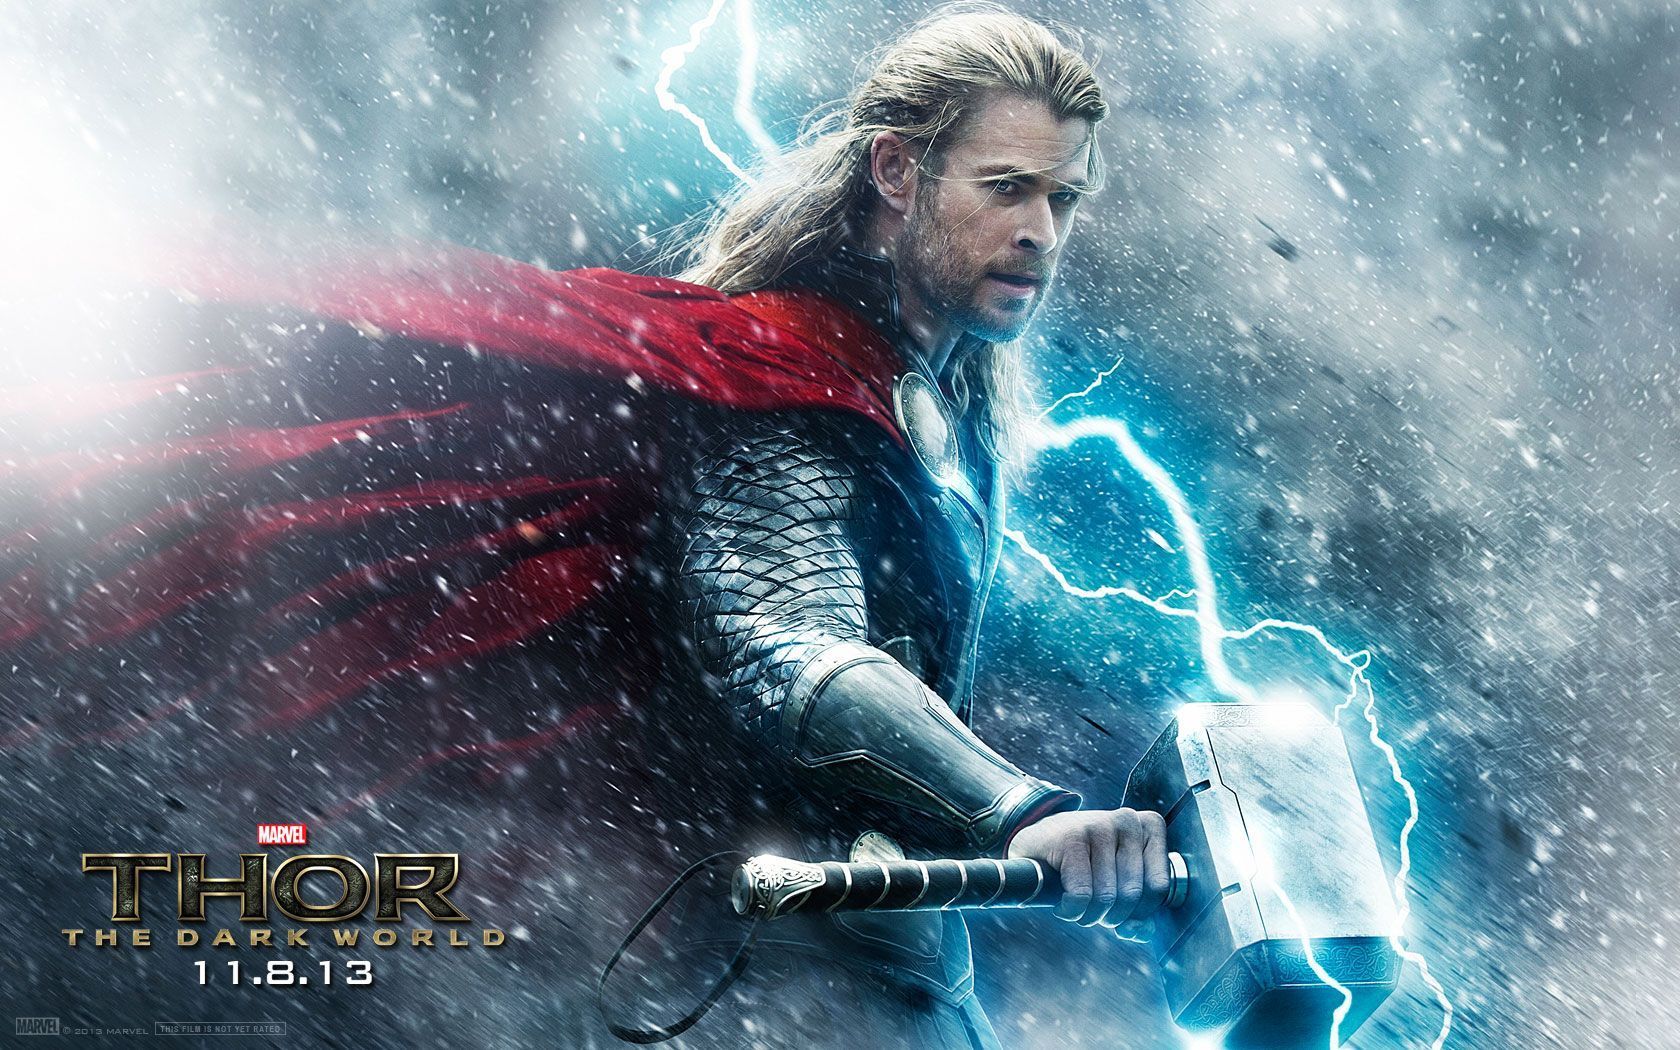 Thor 2 The Dark World 2013 Movie Wallpapers HD & Facebook Covers